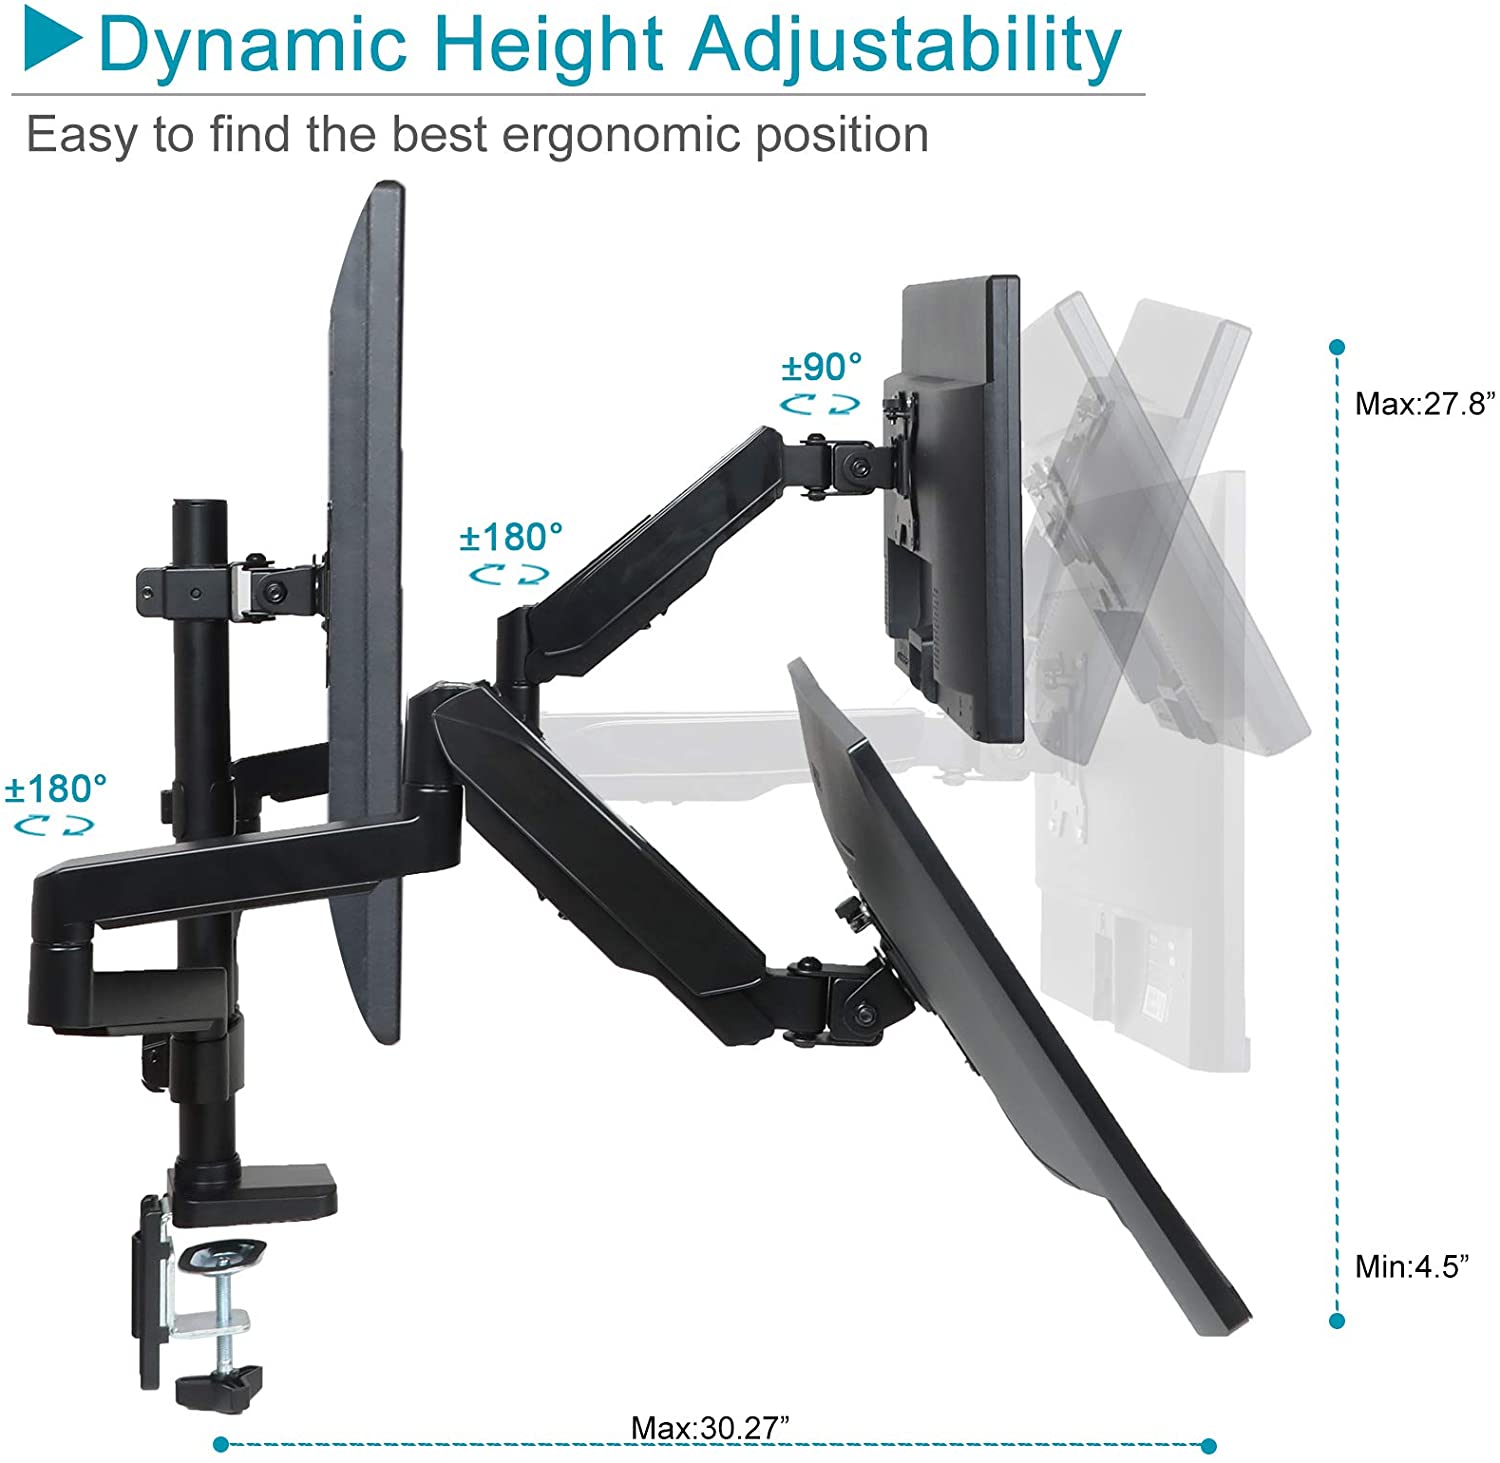 Triple Monitor Stand - Full Motion Articulating Gas Spring Monitor Mount for 3 Computer Screens Up t